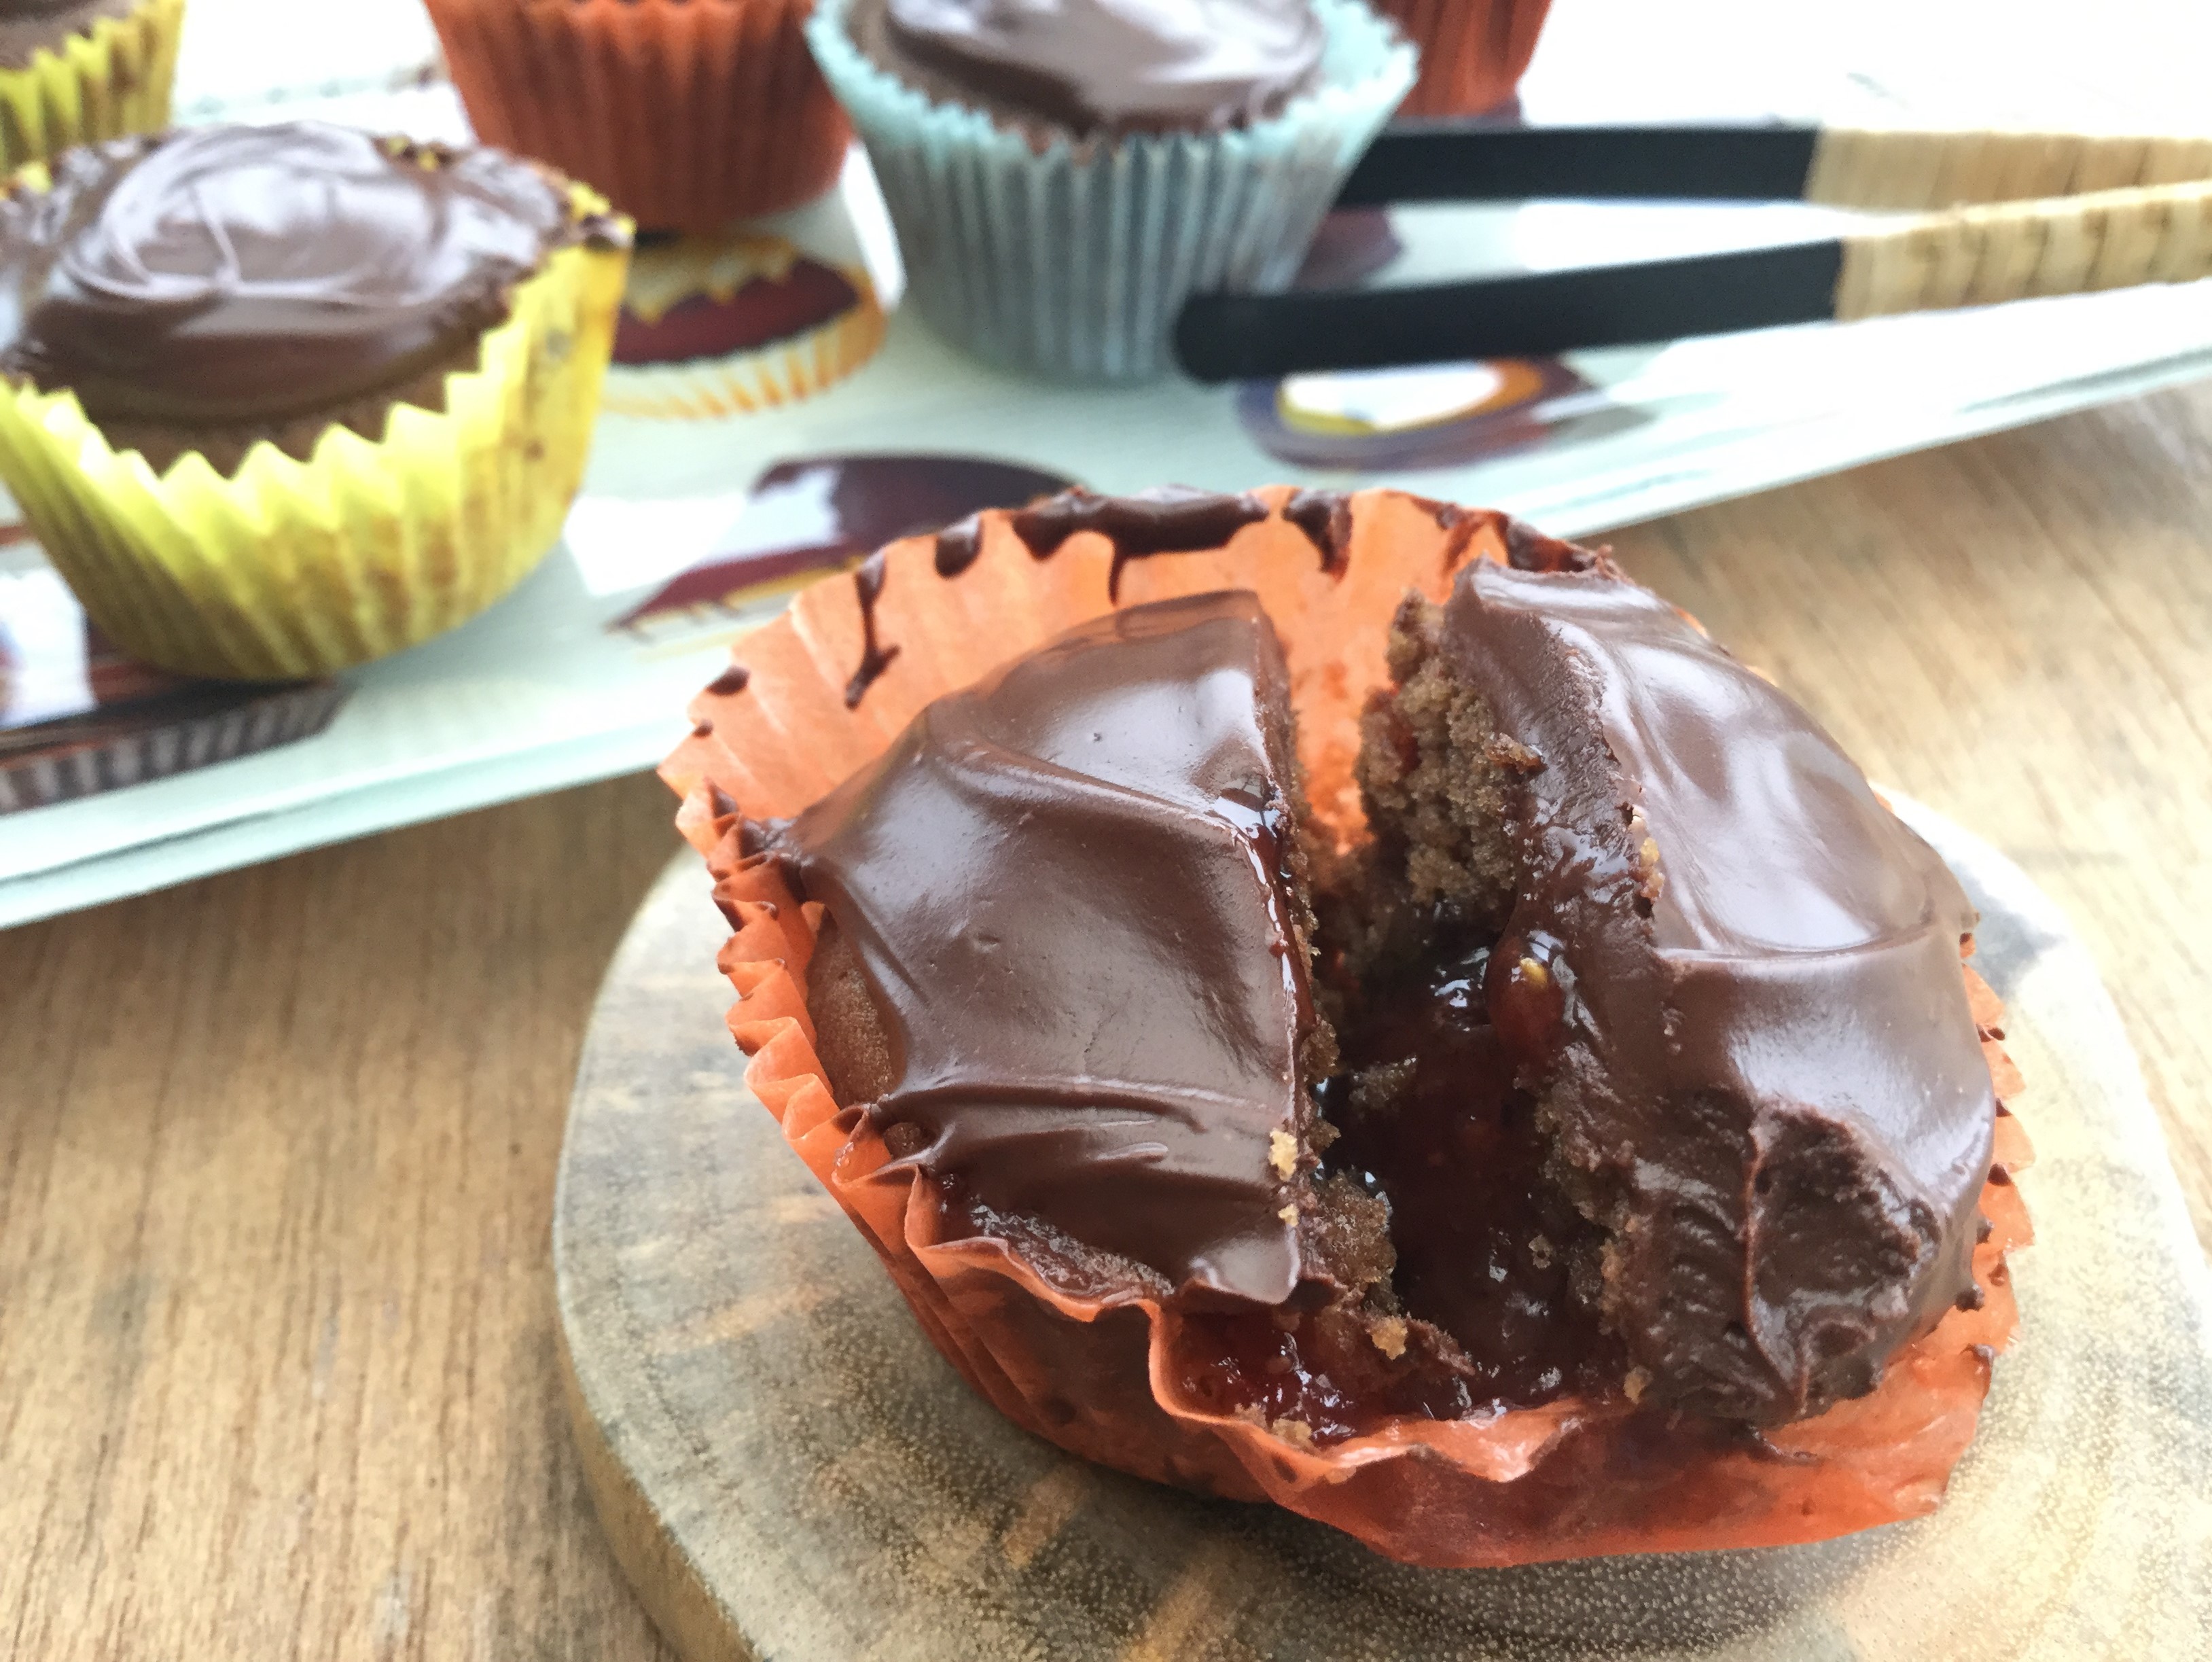 Chocolate cupcakes with a jam filling